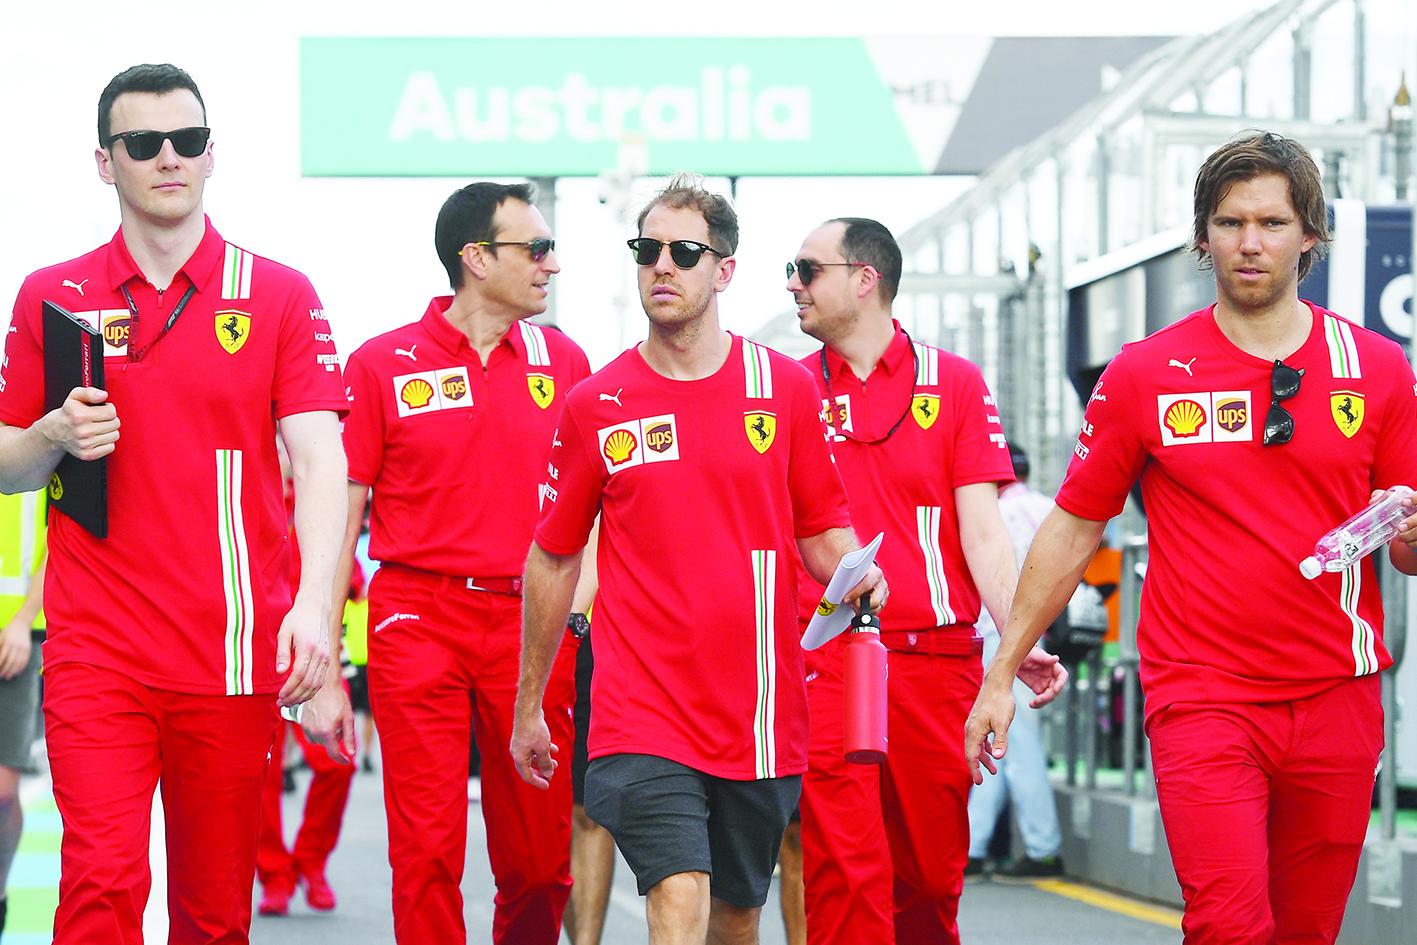 Ferrari's German driver Sebastian Vettel (C) walks down pit lane with team members at the Albert Park circuit ahead of the Formula One Australian Grand Prix in Melbourne on March 11, 2020. (Photo by William WEST / AFP) / -- IMAGE RESTRICTED TO EDITORIAL USE - STRICTLY NO COMMERCIAL USE --